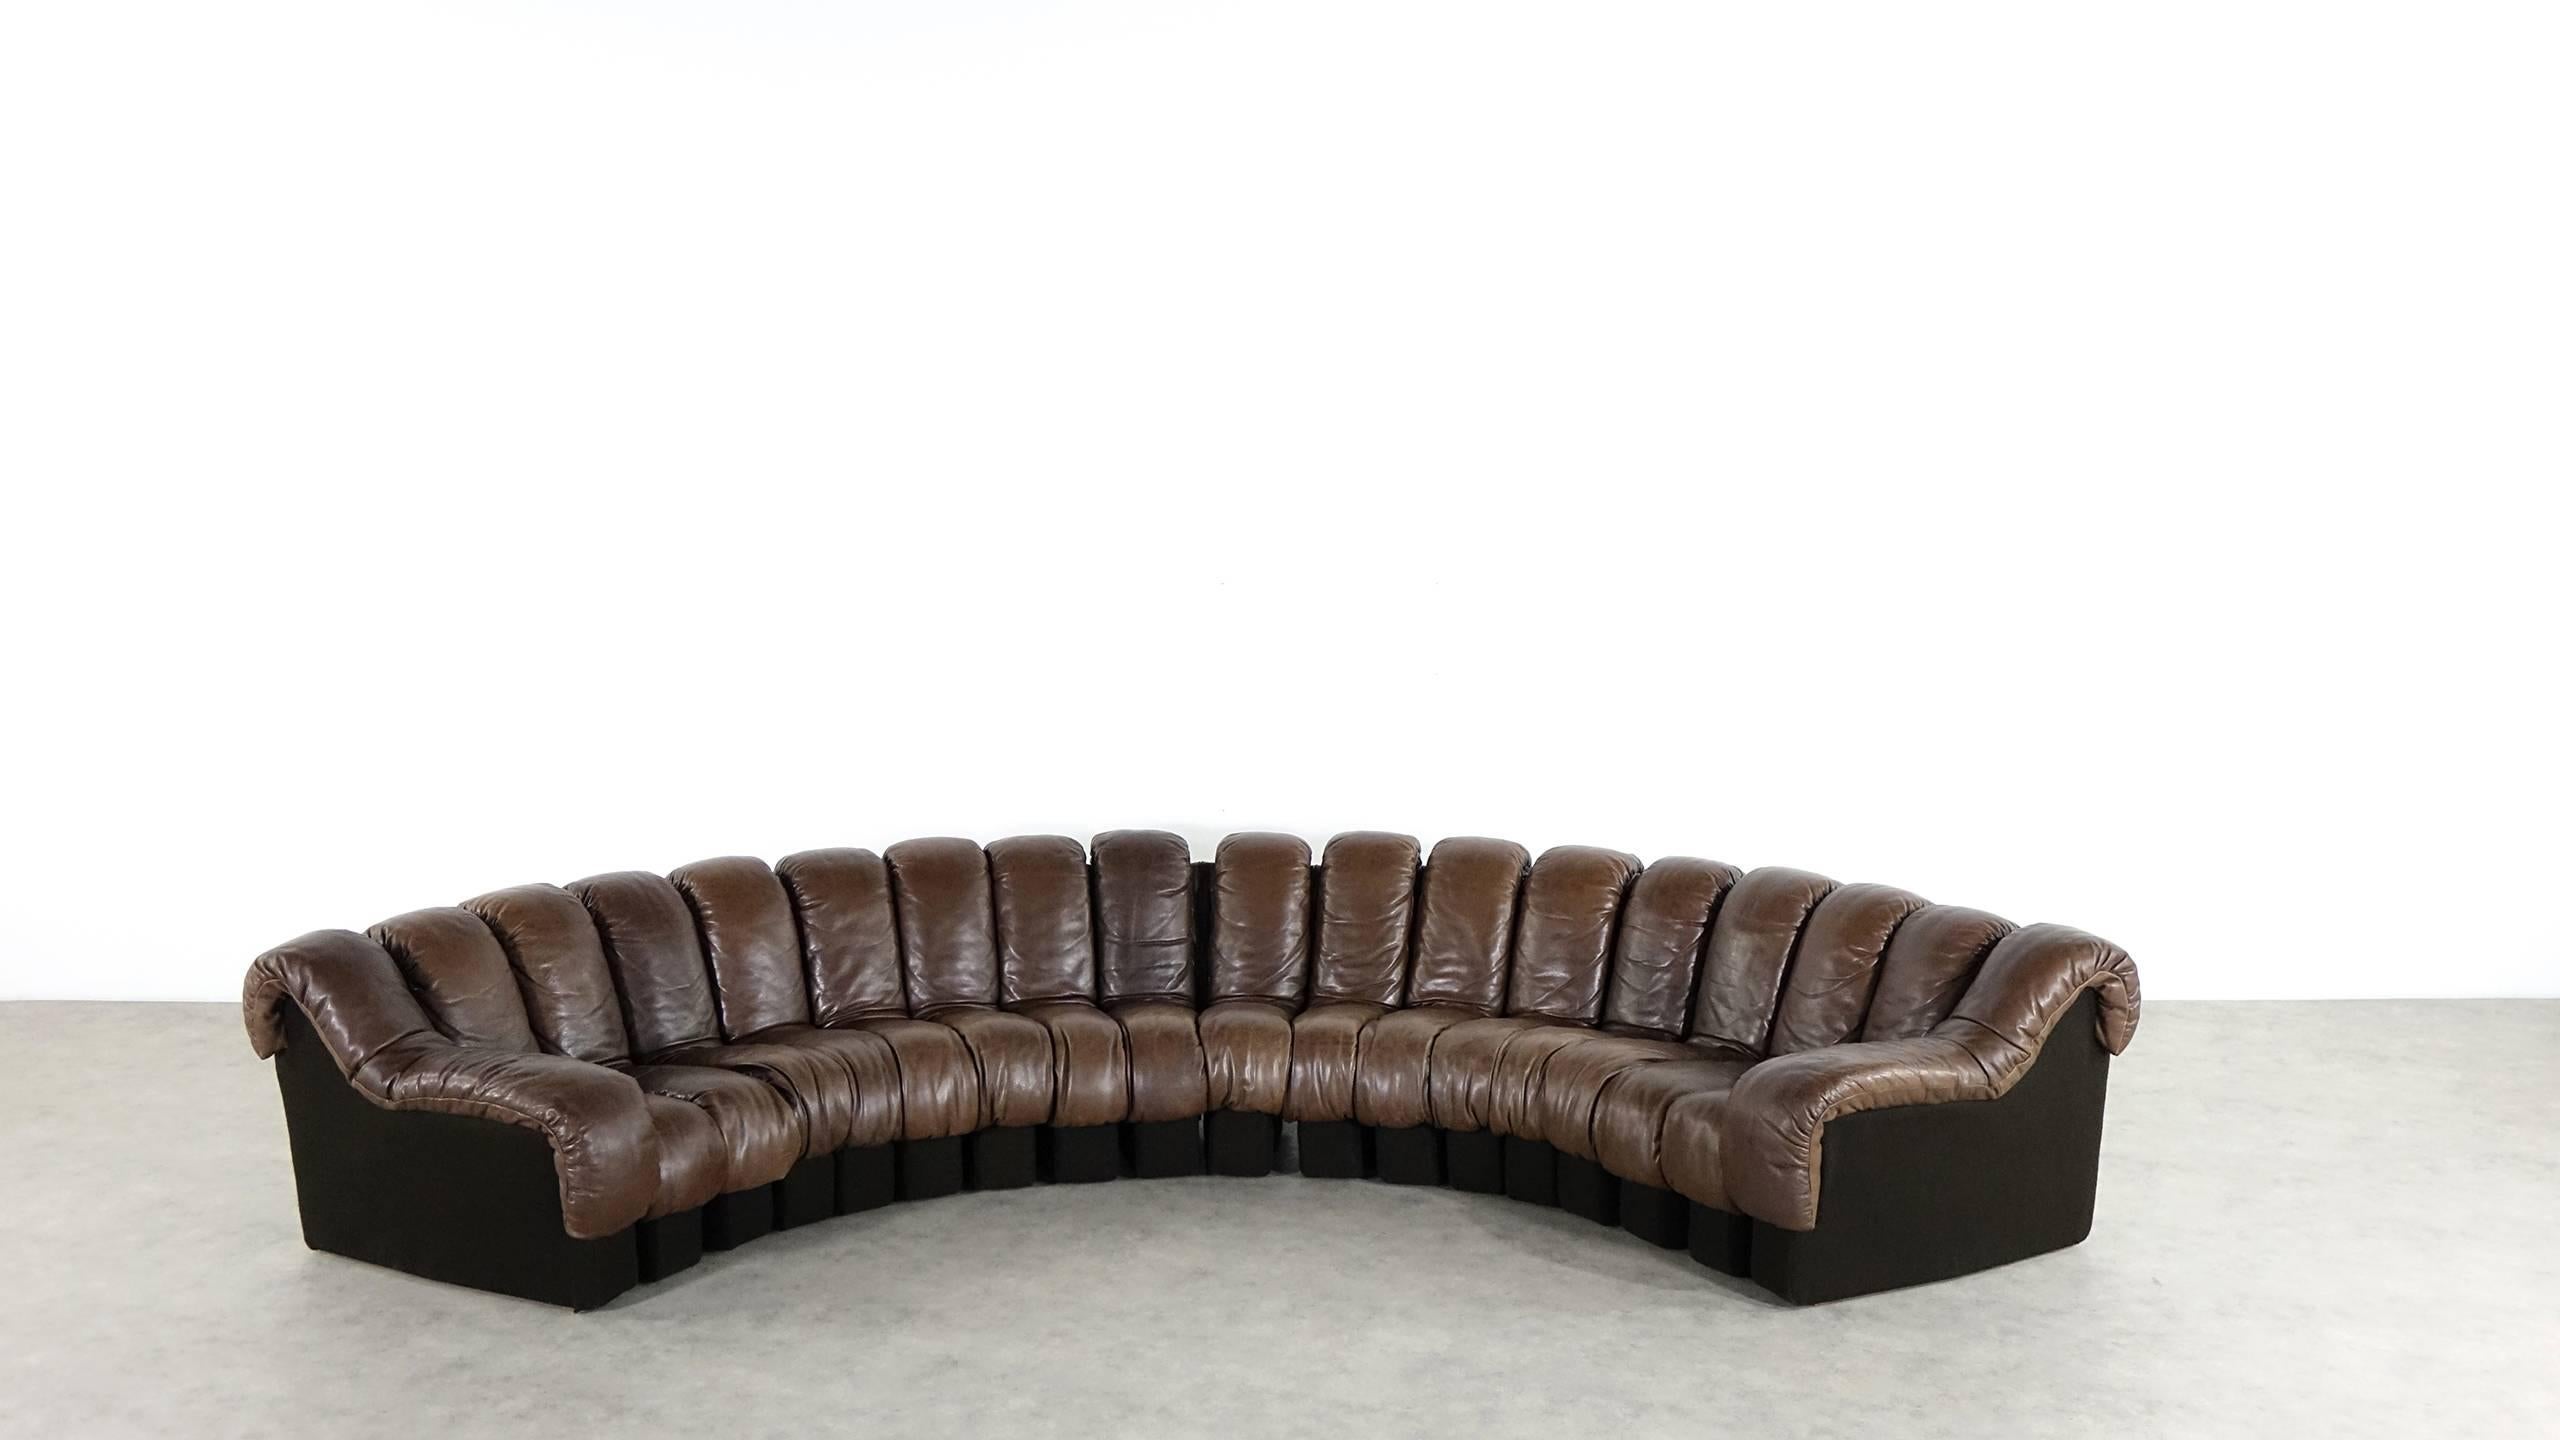 De Sede Ds 600 Sofa by Ueli Berger and Riva 1972, Chocolate Leather 18 Elements 2